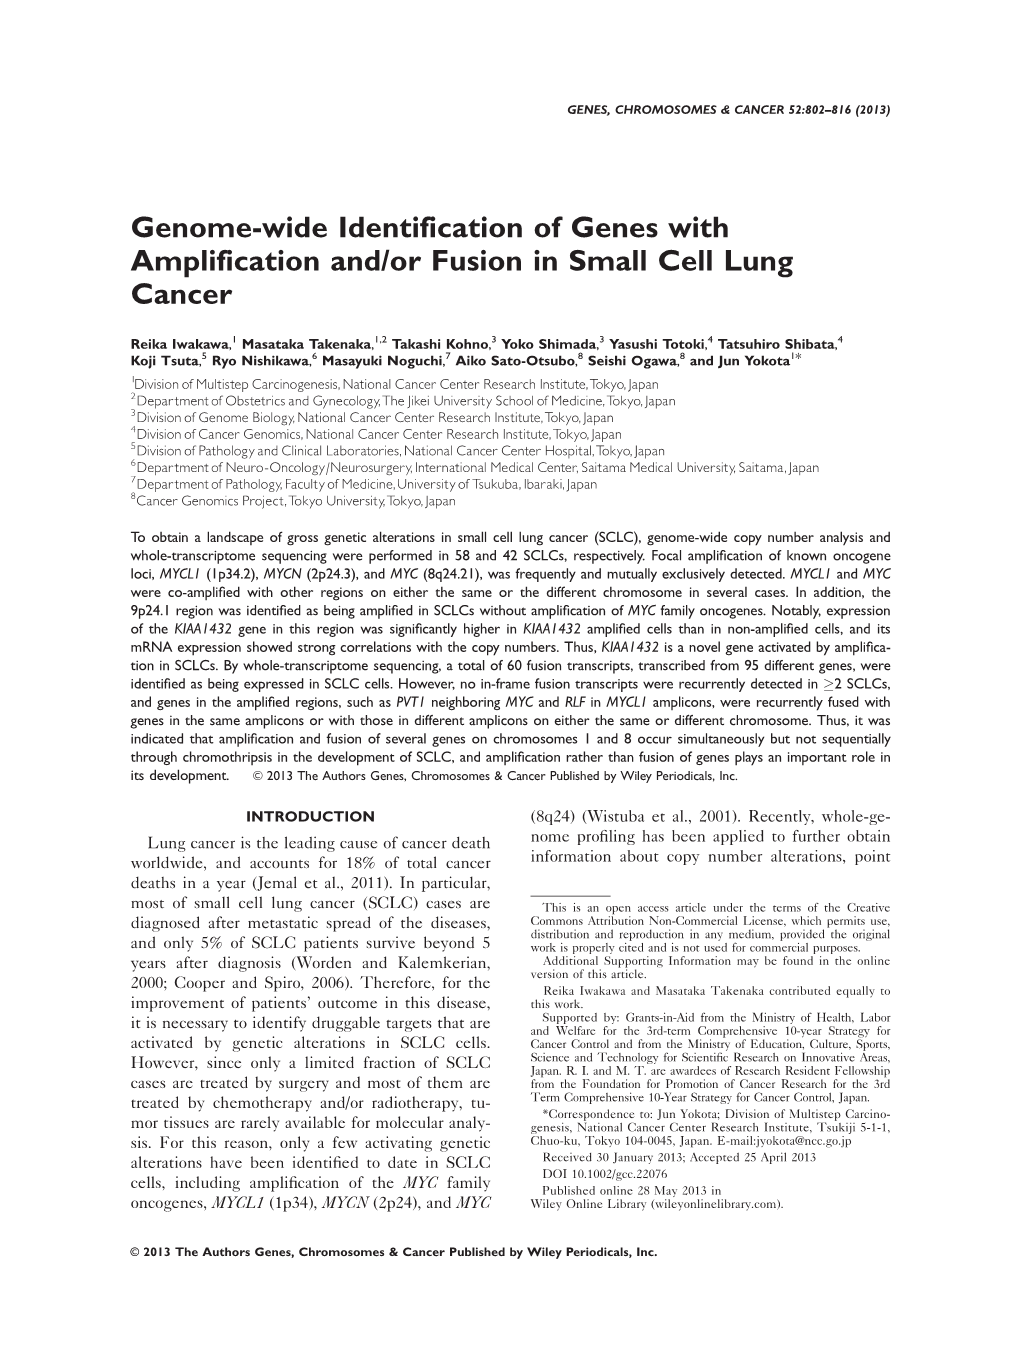 Genomewide Identification of Genes with Amplification And/Or Fusion In